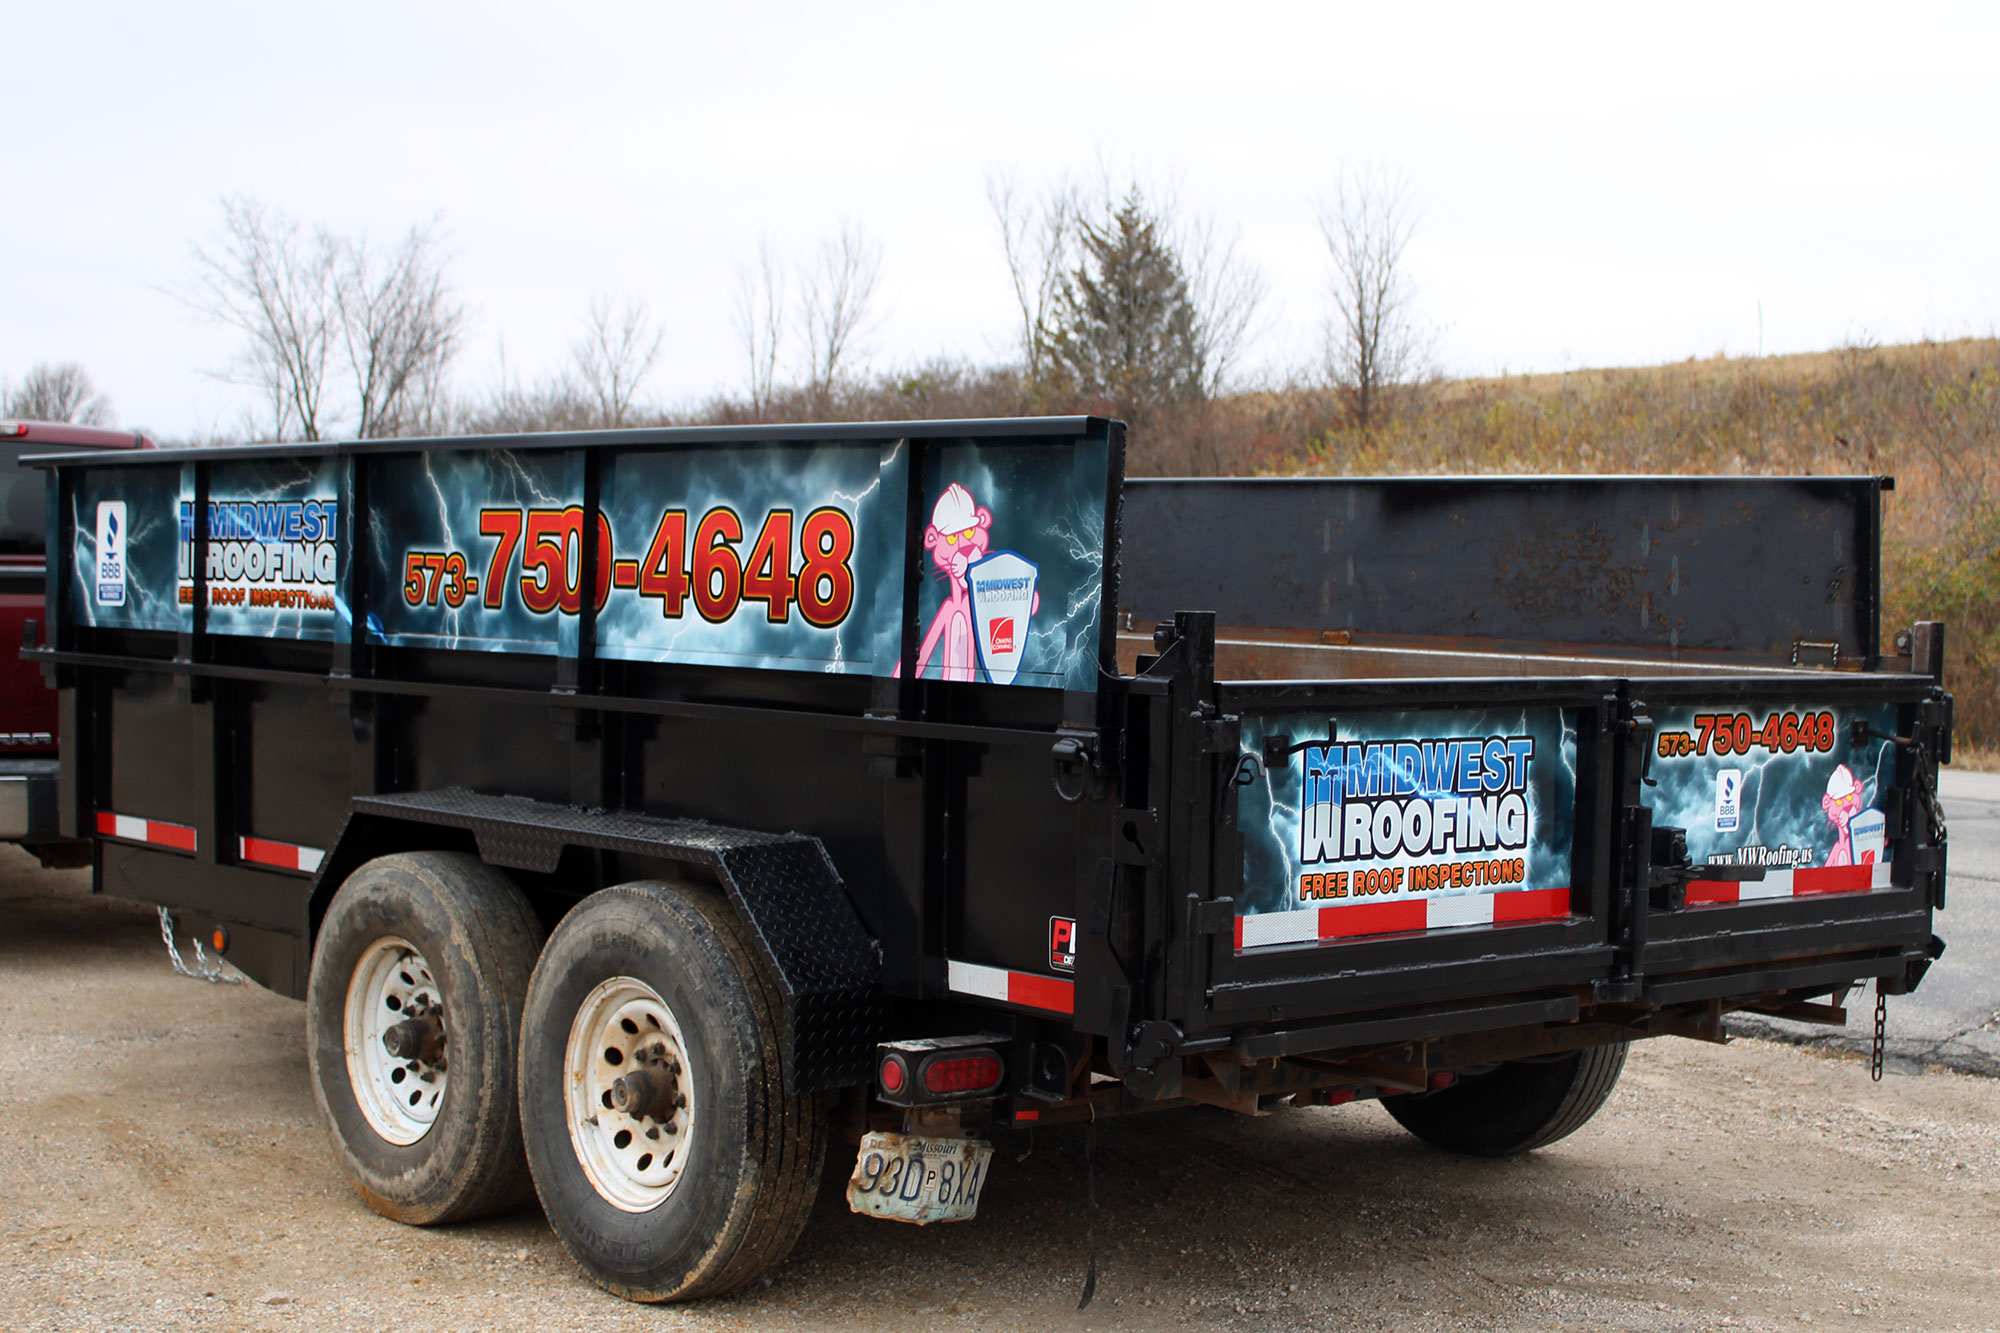 Midwest Roofing Dump Trailer Dumping Open Top Trailers Construction Vinyl Wrapping Pro Dezigns Columbia Missouri